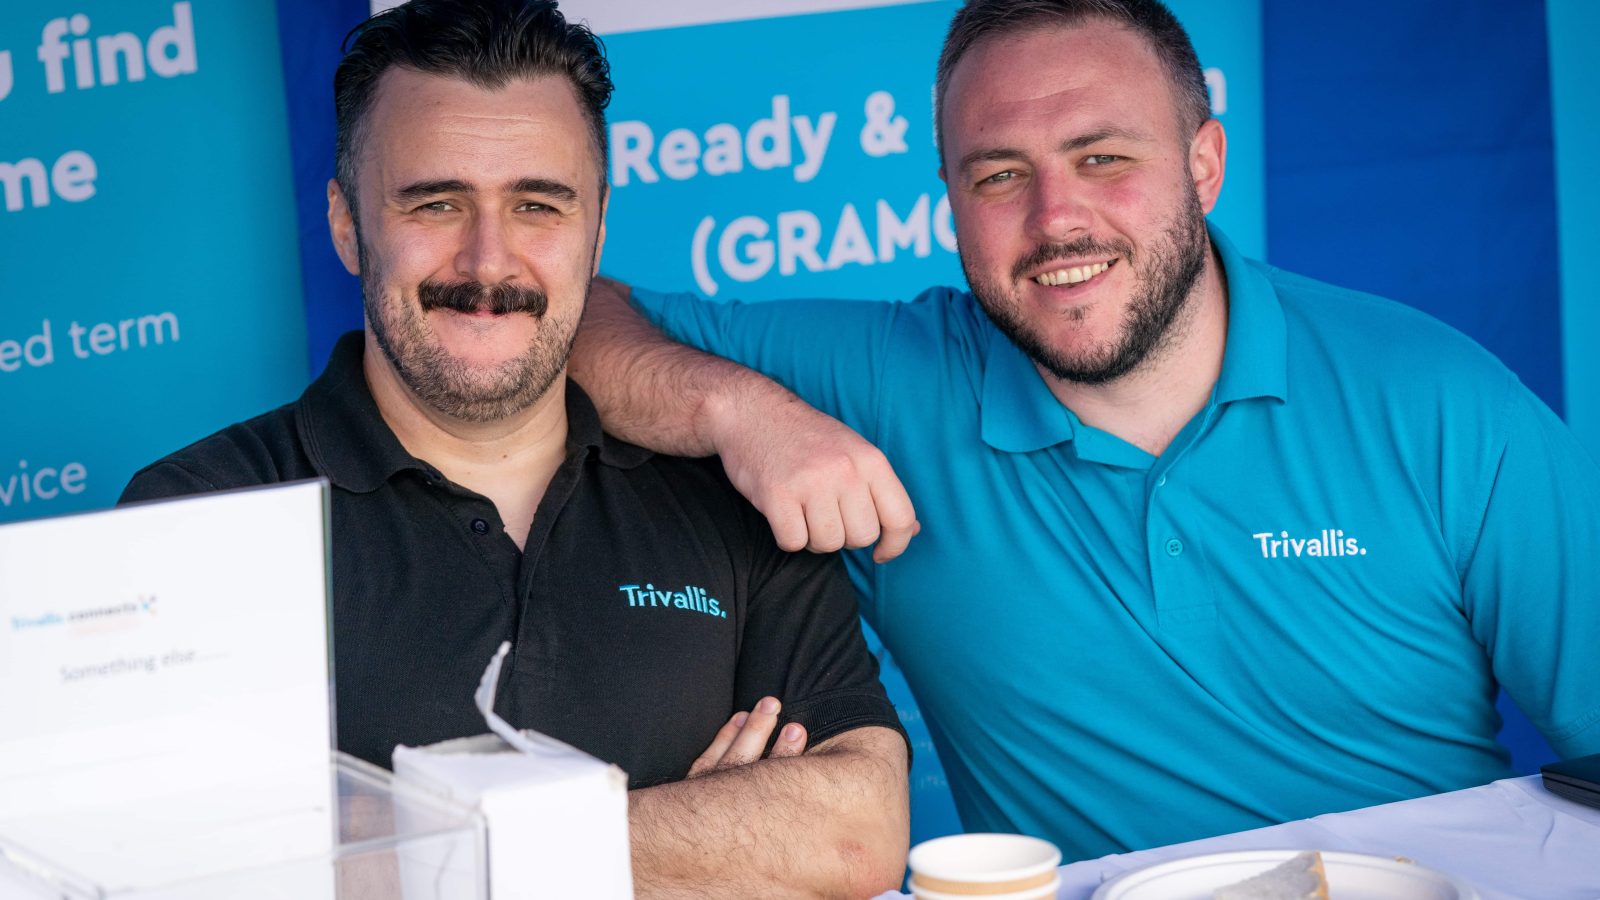 Trivallis Housing Landlord Wales Two men wearing Trivallis-branded polo shirts are smiling and posing at an outdoor housing event, with a promotional stand in the background and a table with paperwork and a coffee cup in the foreground.